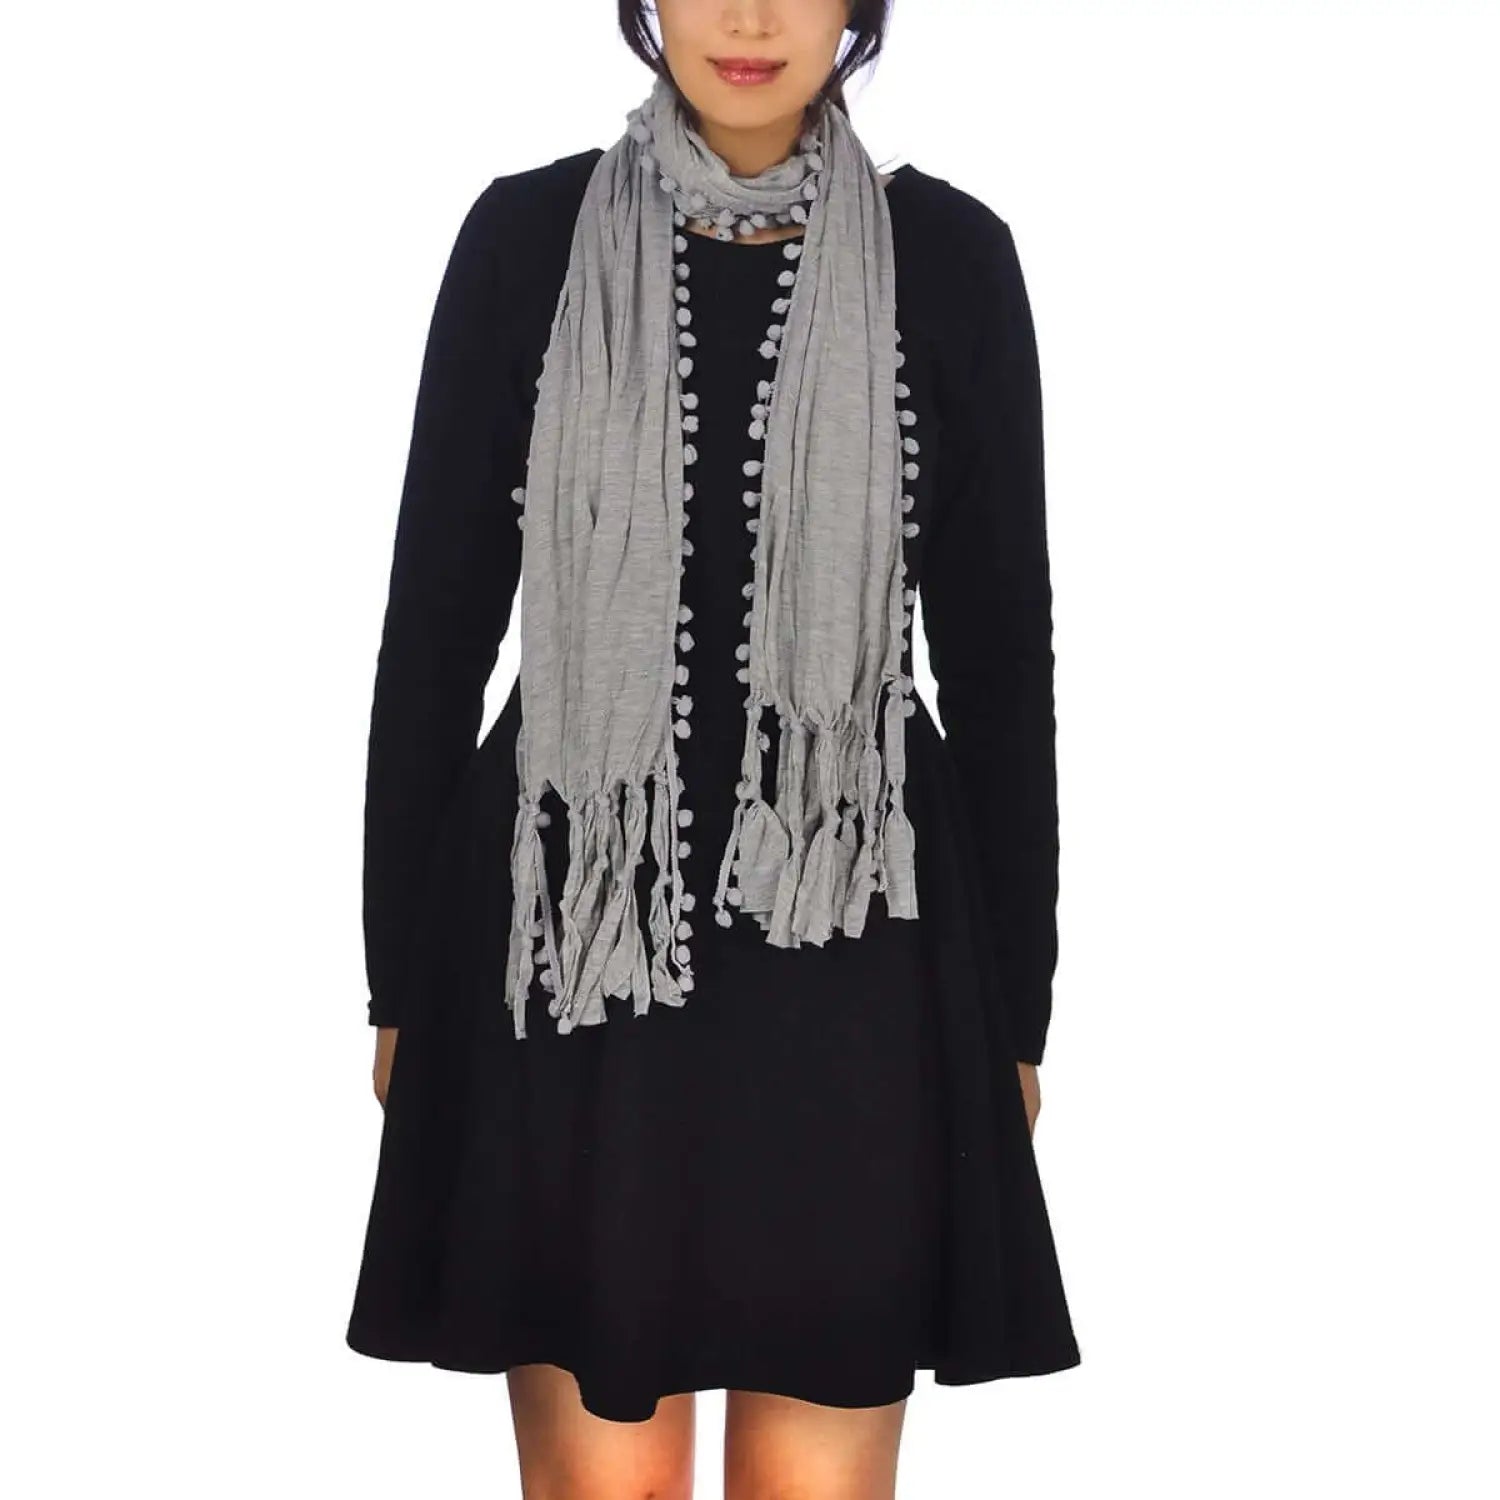 Woman in black dress and gray scarf featuring Pom Pom Edge Crinkled Fabric Long Neck Scarf